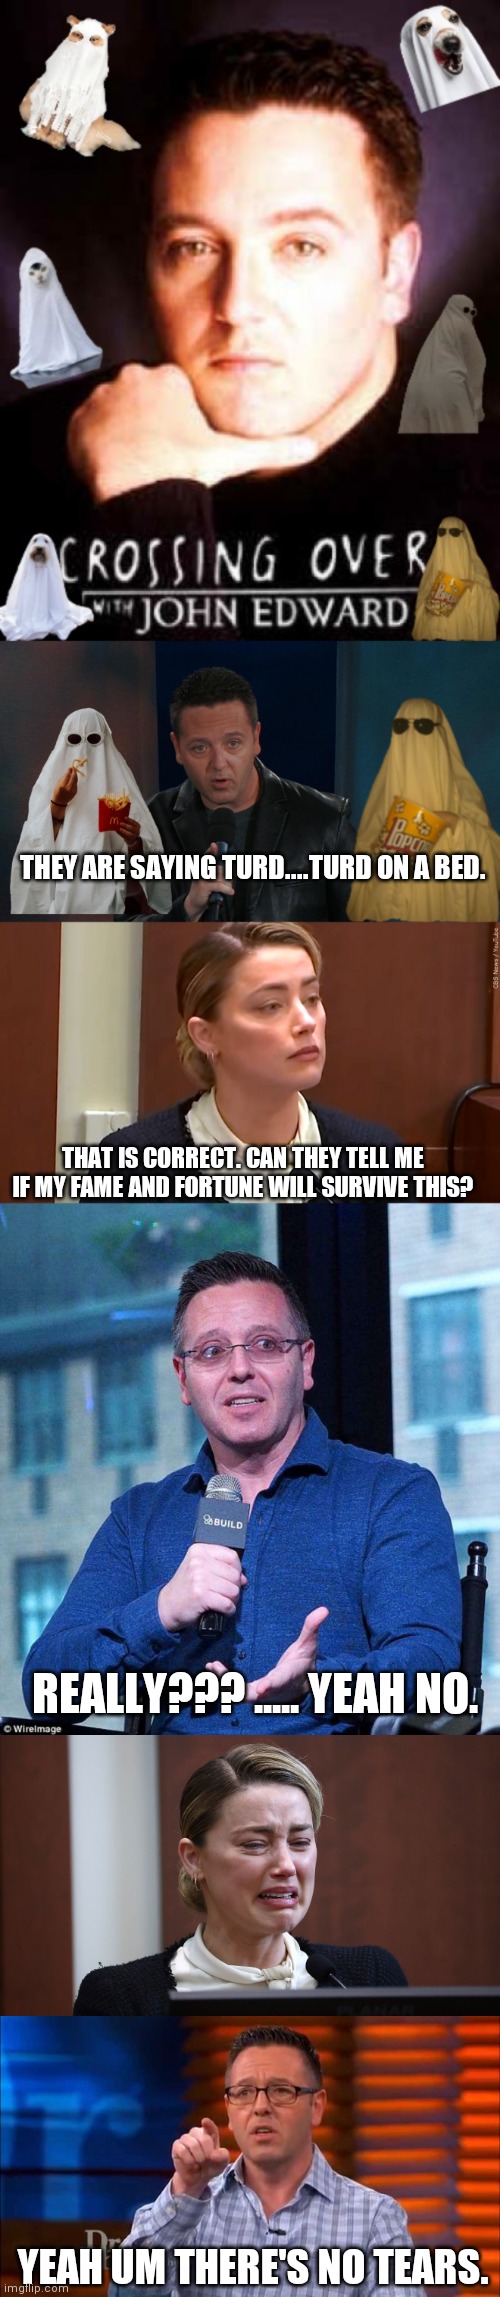 The episode of crossing over with john edwards |  THEY ARE SAYING TURD....TURD ON A BED. THAT IS CORRECT. CAN THEY TELL ME IF MY FAME AND FORTUNE WILL SURVIVE THIS? REALLY??? ..... YEAH NO. YEAH UM THERE'S NO TEARS. | image tagged in amber heard,ghost,johnny depp,trial,psychic | made w/ Imgflip meme maker